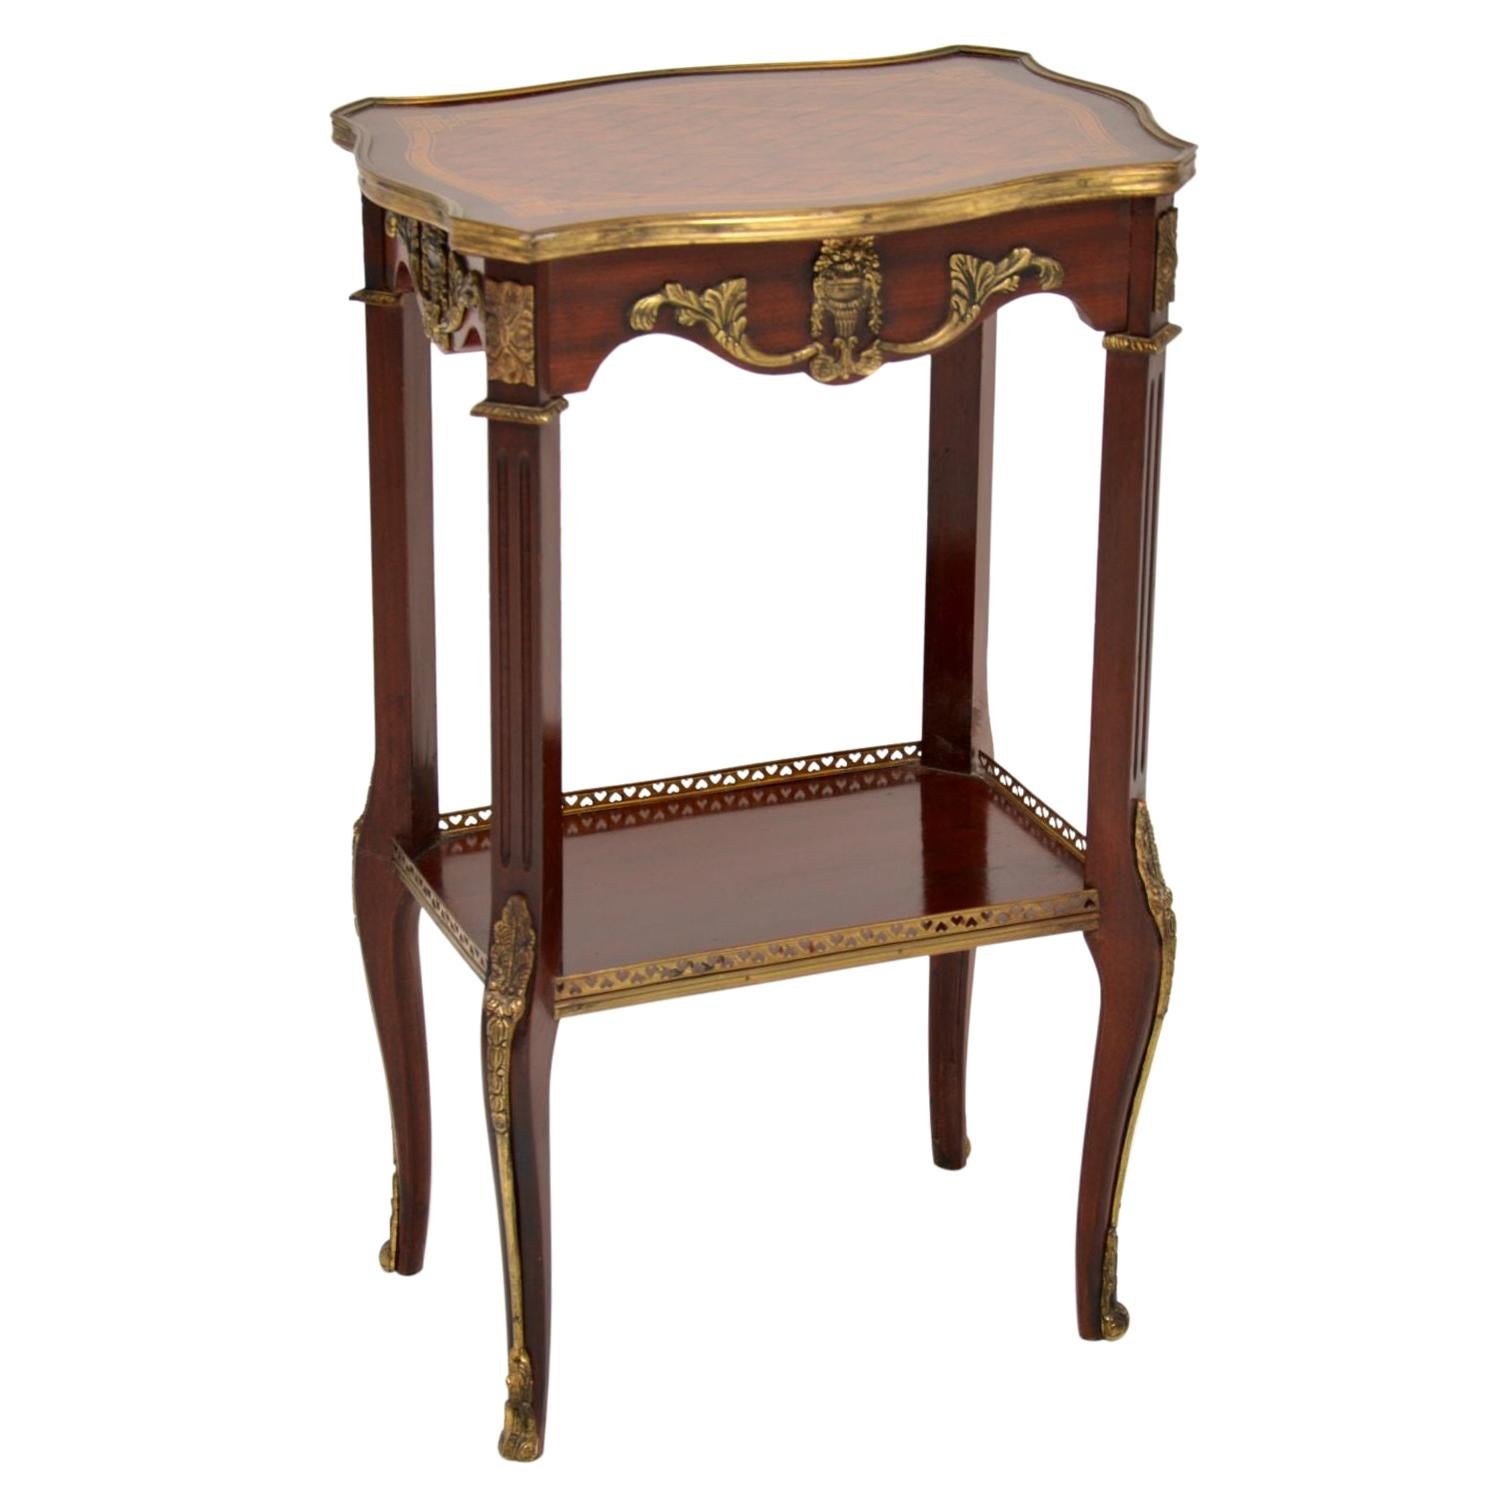 Antique French Inlaid Parquetry Side Table